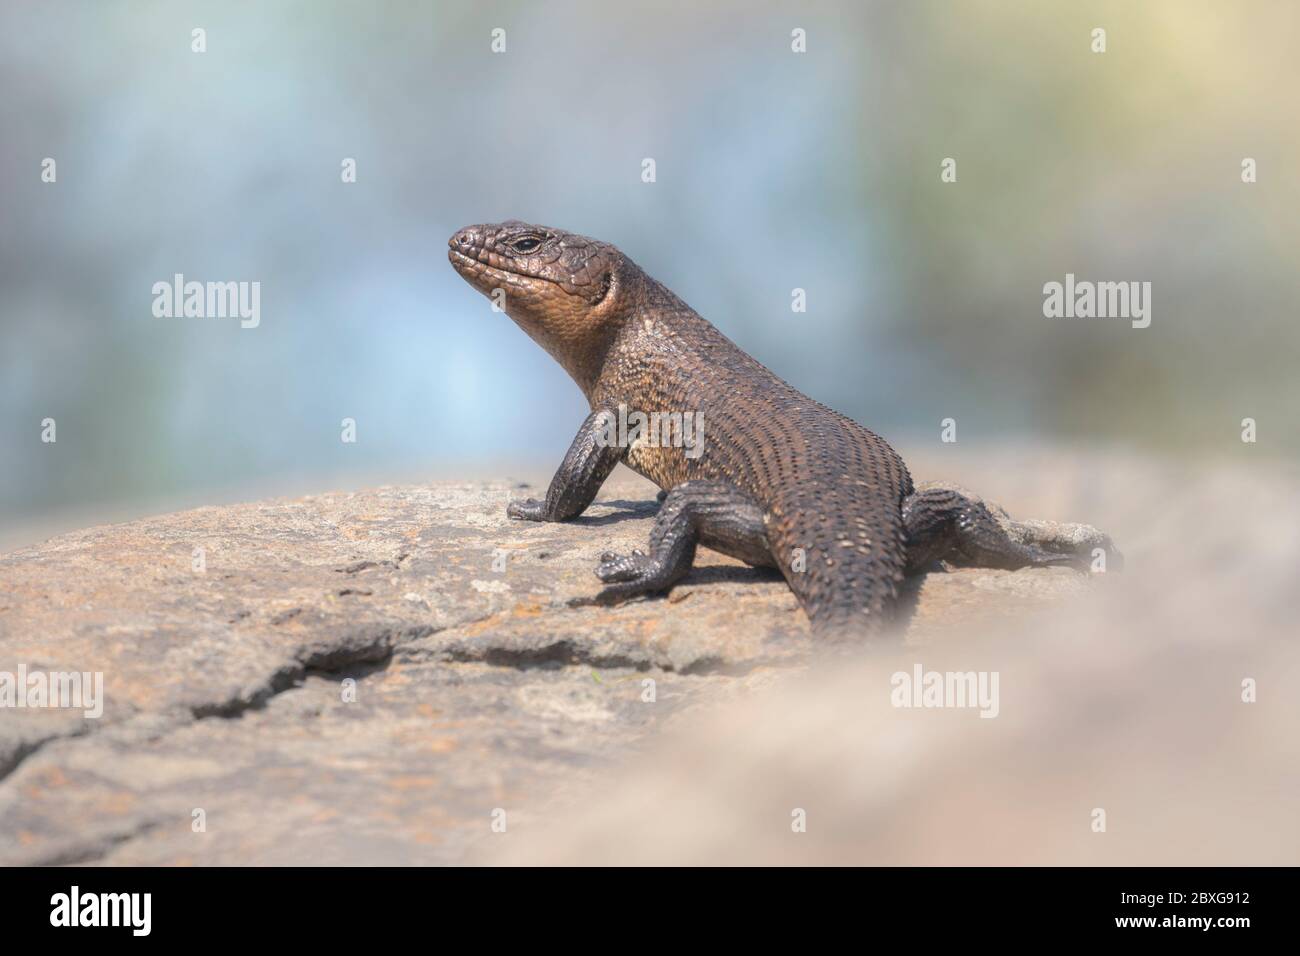 Cunninghams spiny-tailed skink on a rock, Australia Stock Photo